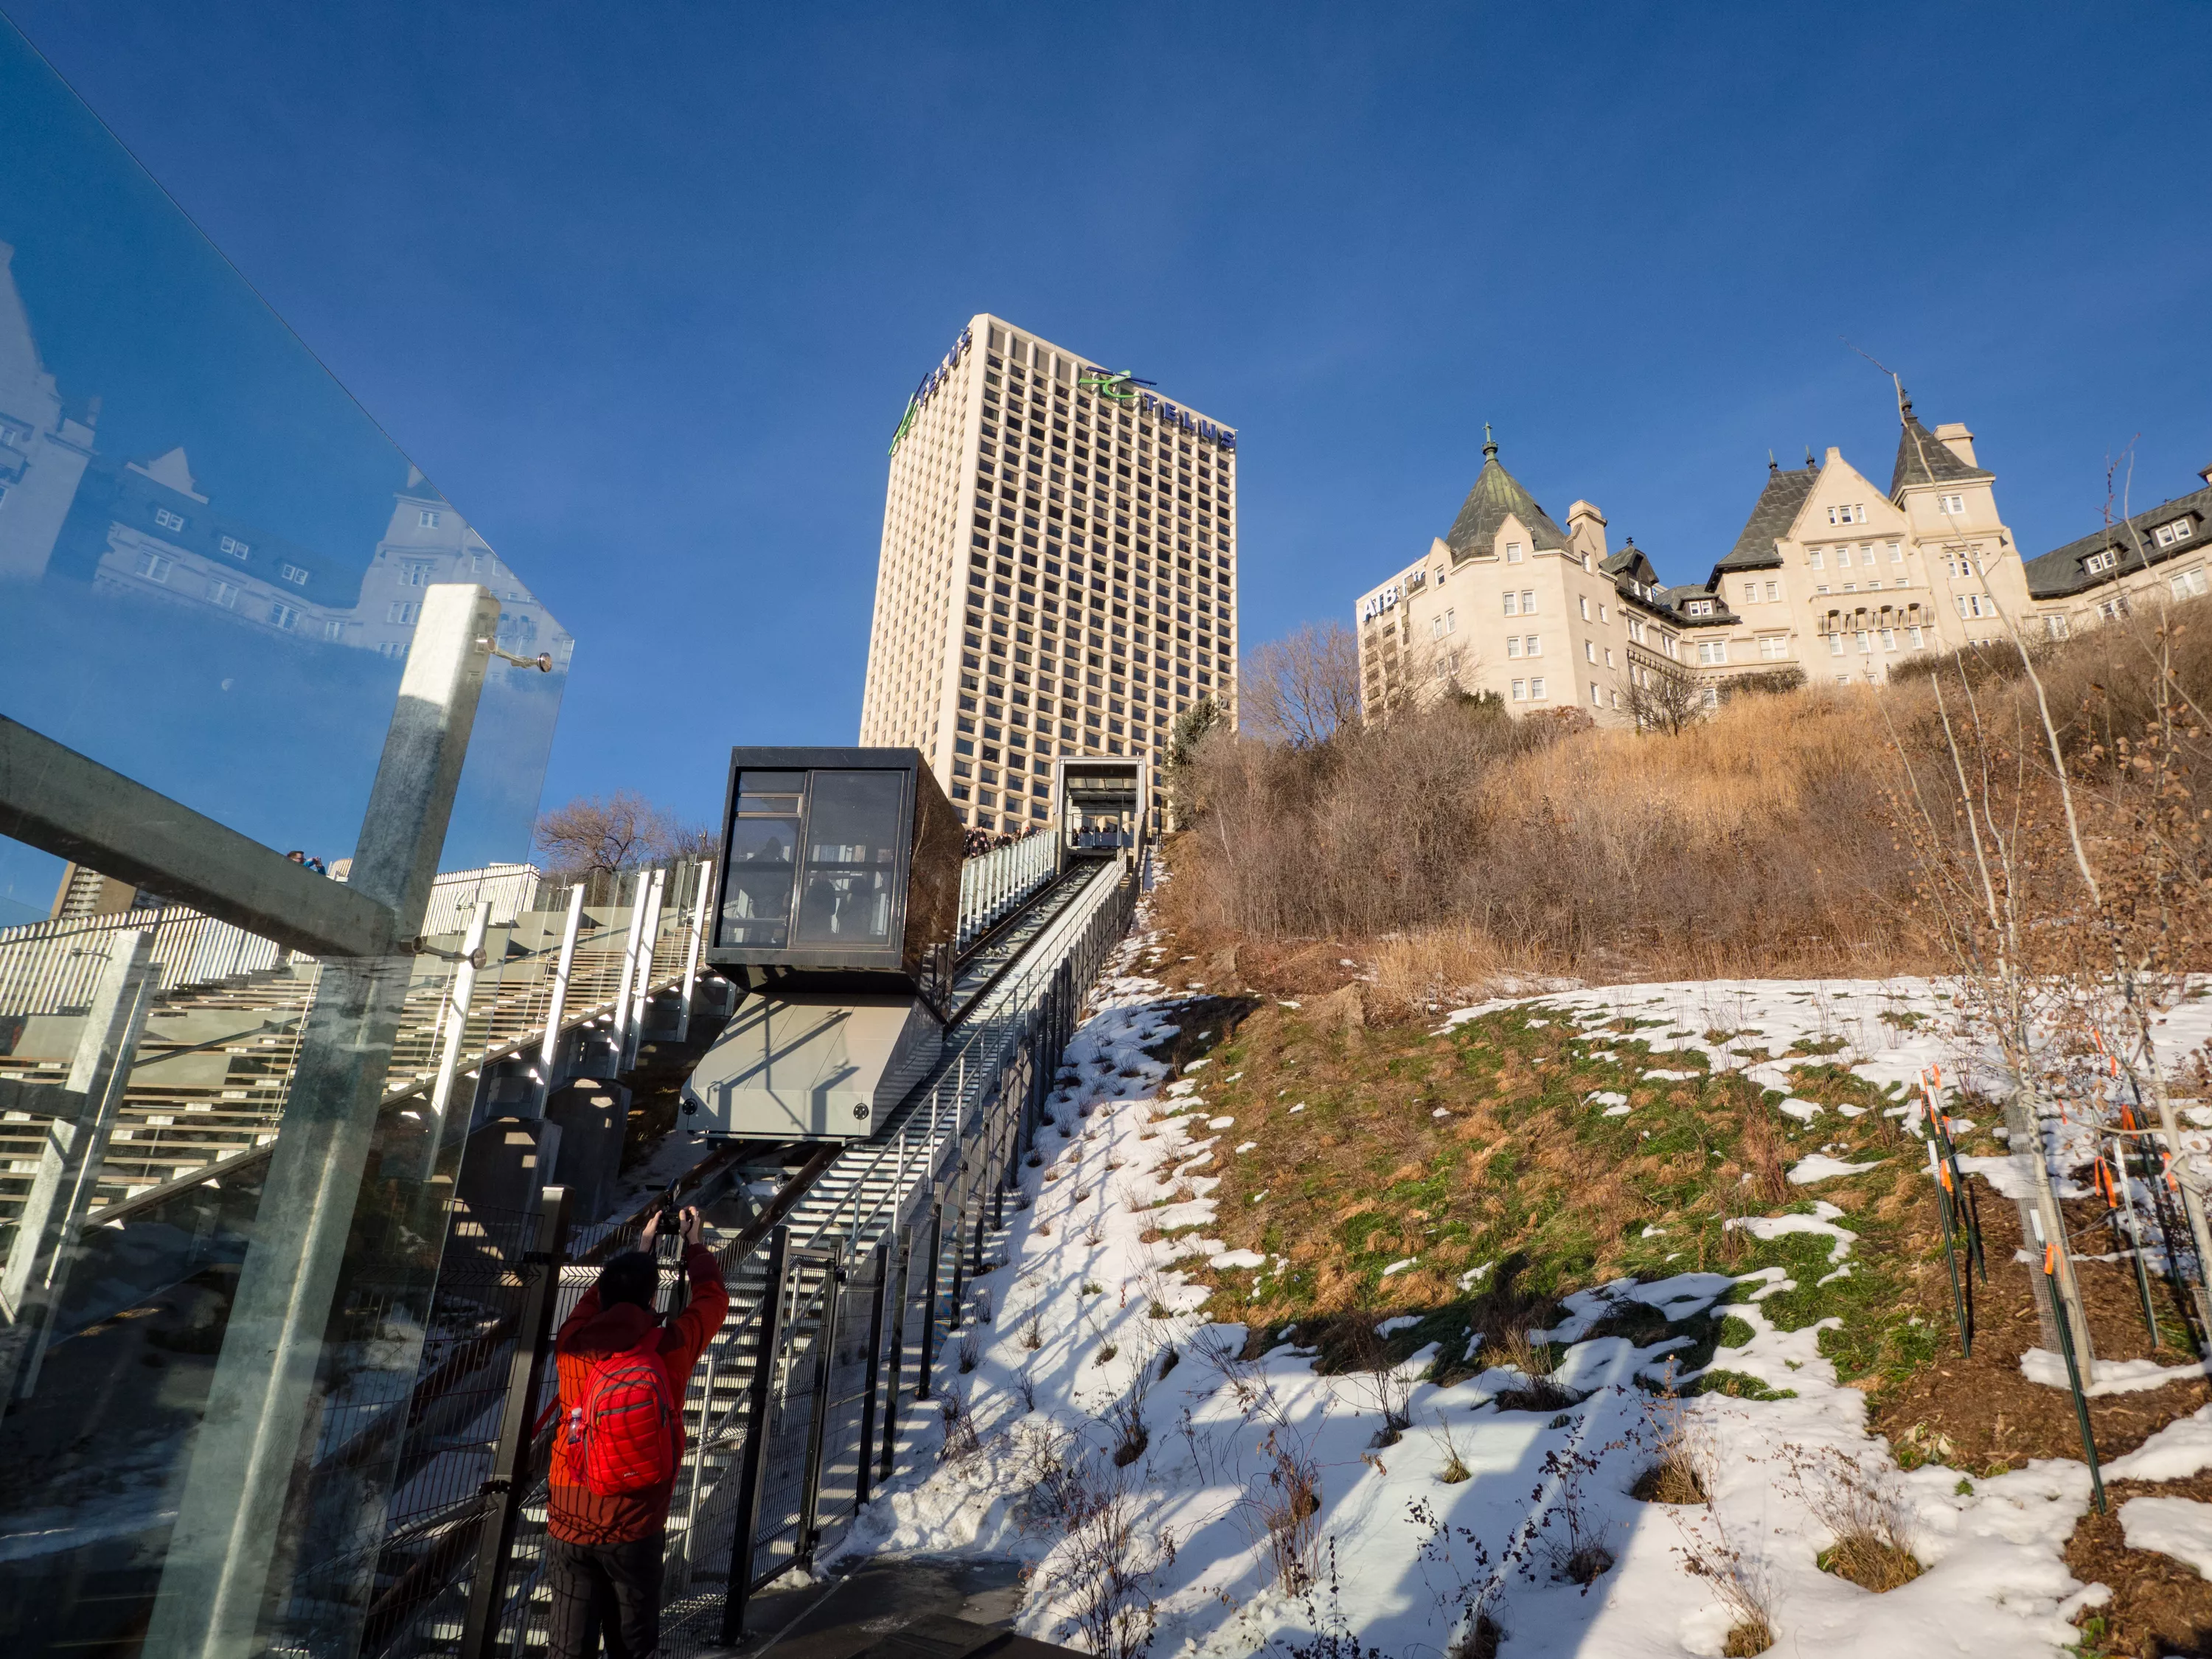 100 Street Funicular in Canada, North America  - Rated 3.5